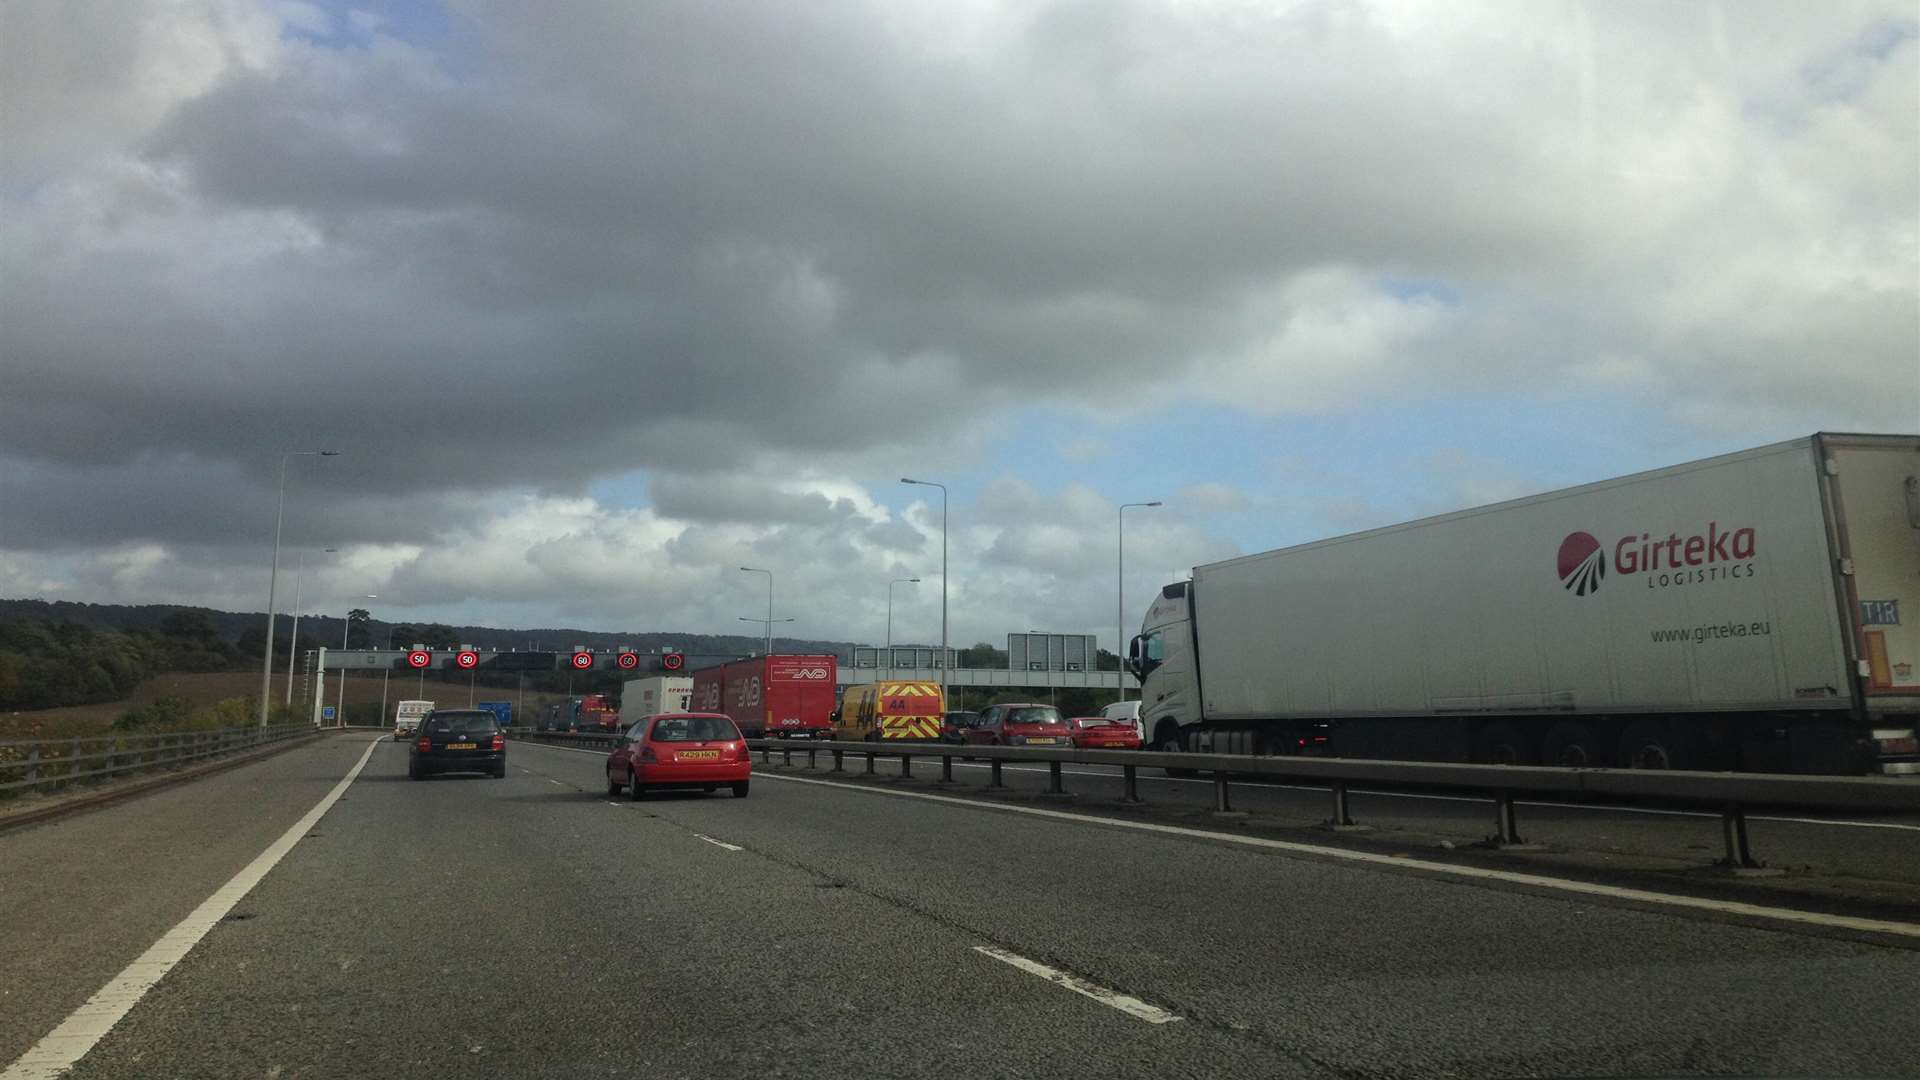 Queuing traffic on the M20 at Maidstone